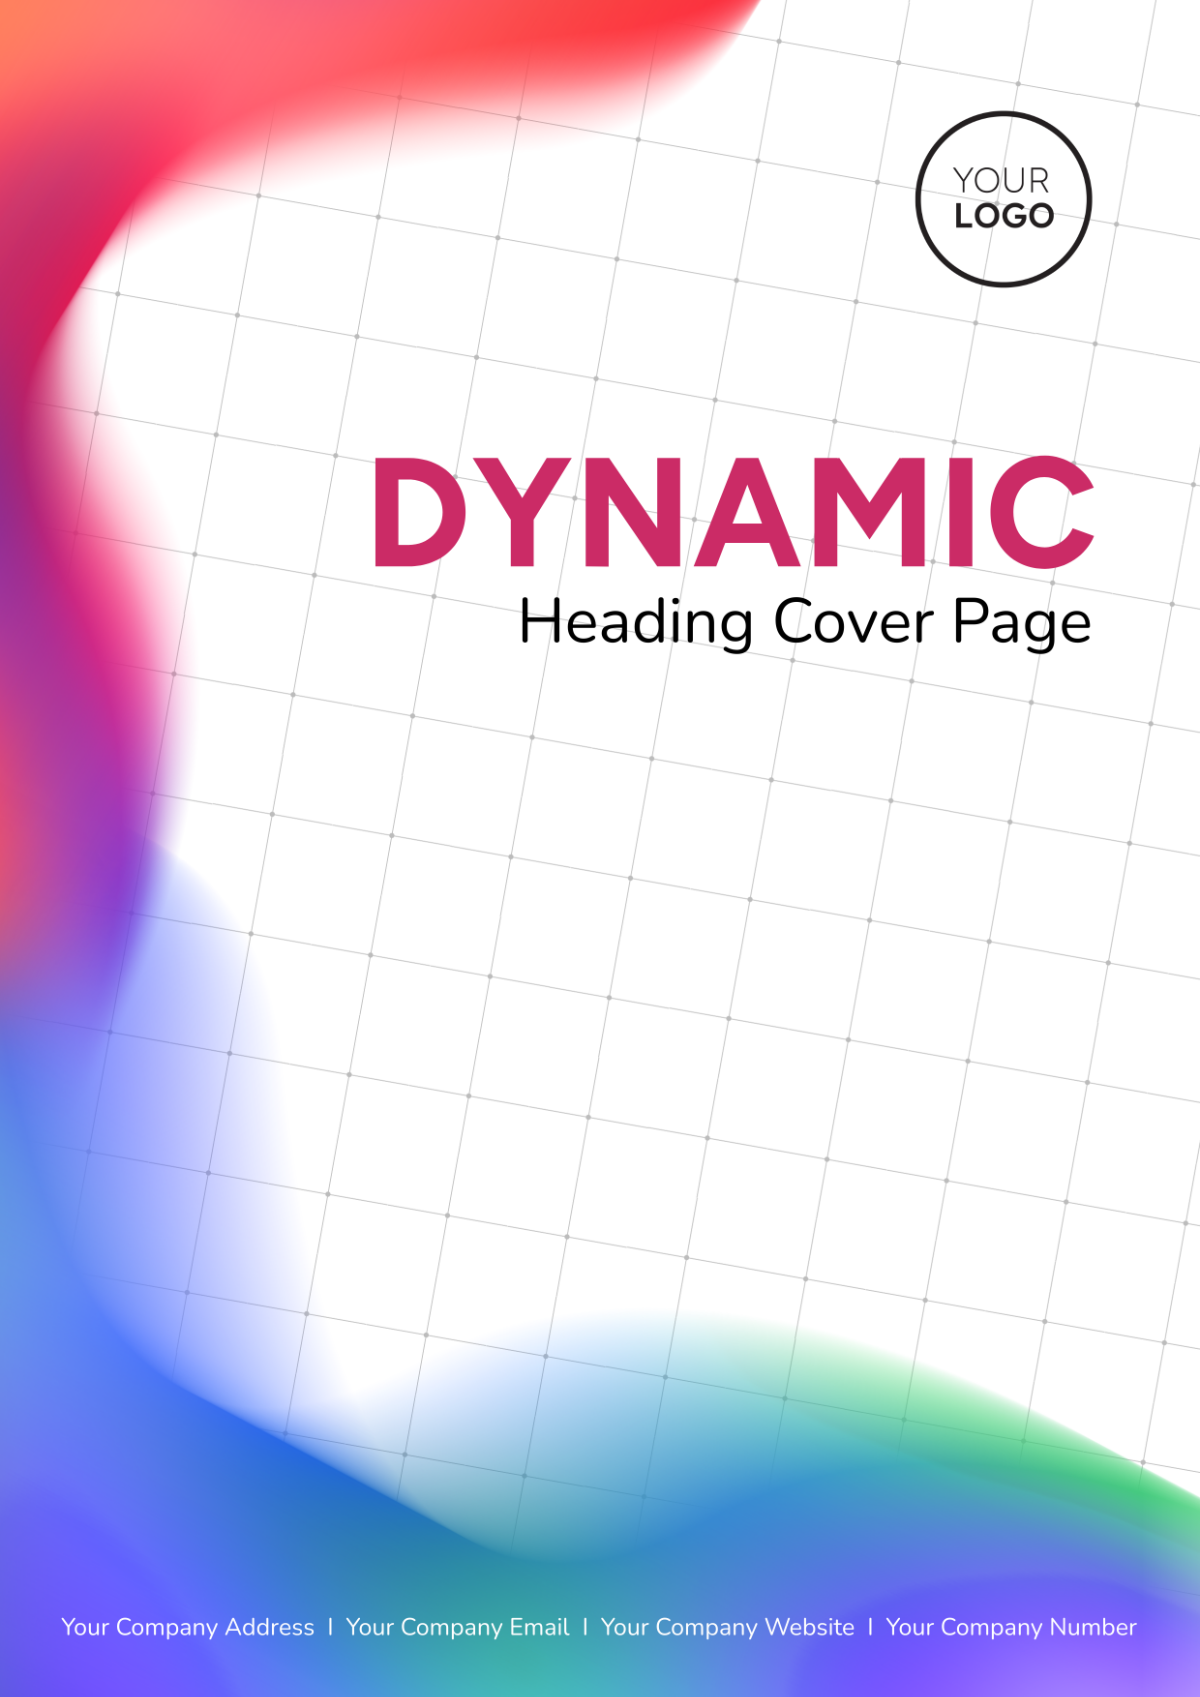 Dynamic Heading Cover Page